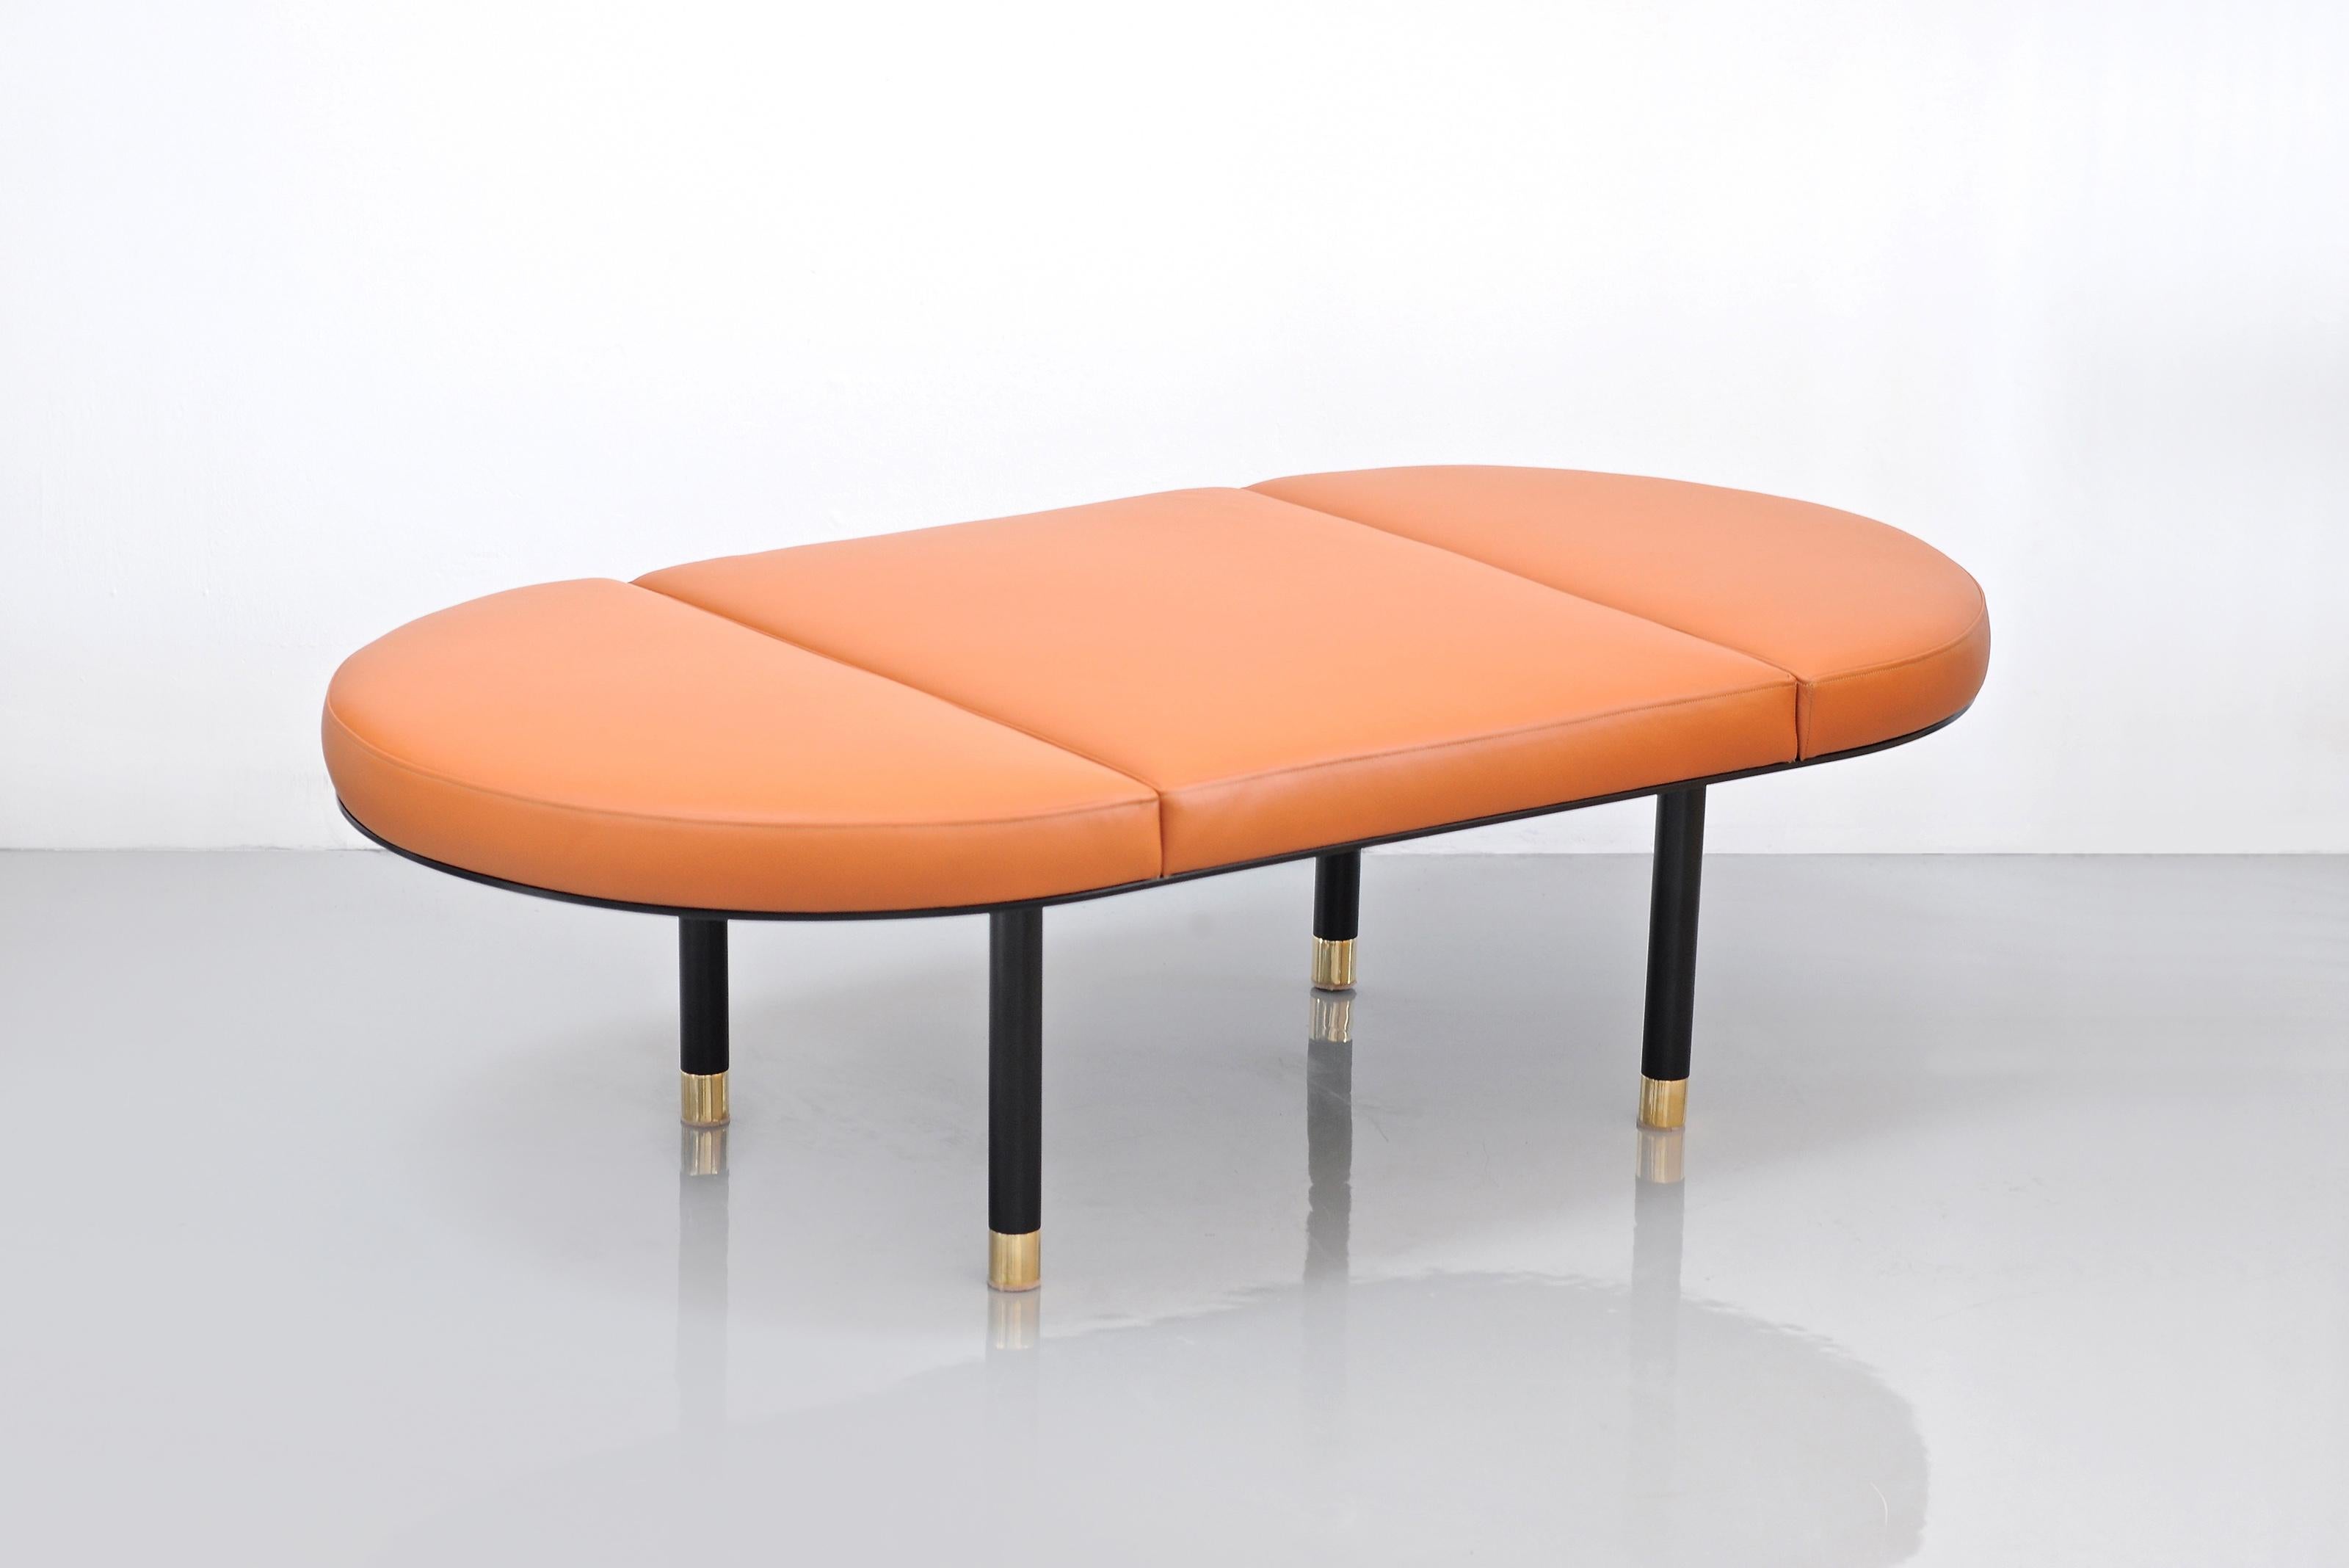 3 Piece Pill Leather Bench by Phase Design
Dimensions: D 149.9 x W 71.1 x H 38.1 cm. 
Materials: Powder-coated steel, brass and leather.

Powder coated steel base with solid brass tips. Powder coat finishes available in flat black, flat white, or